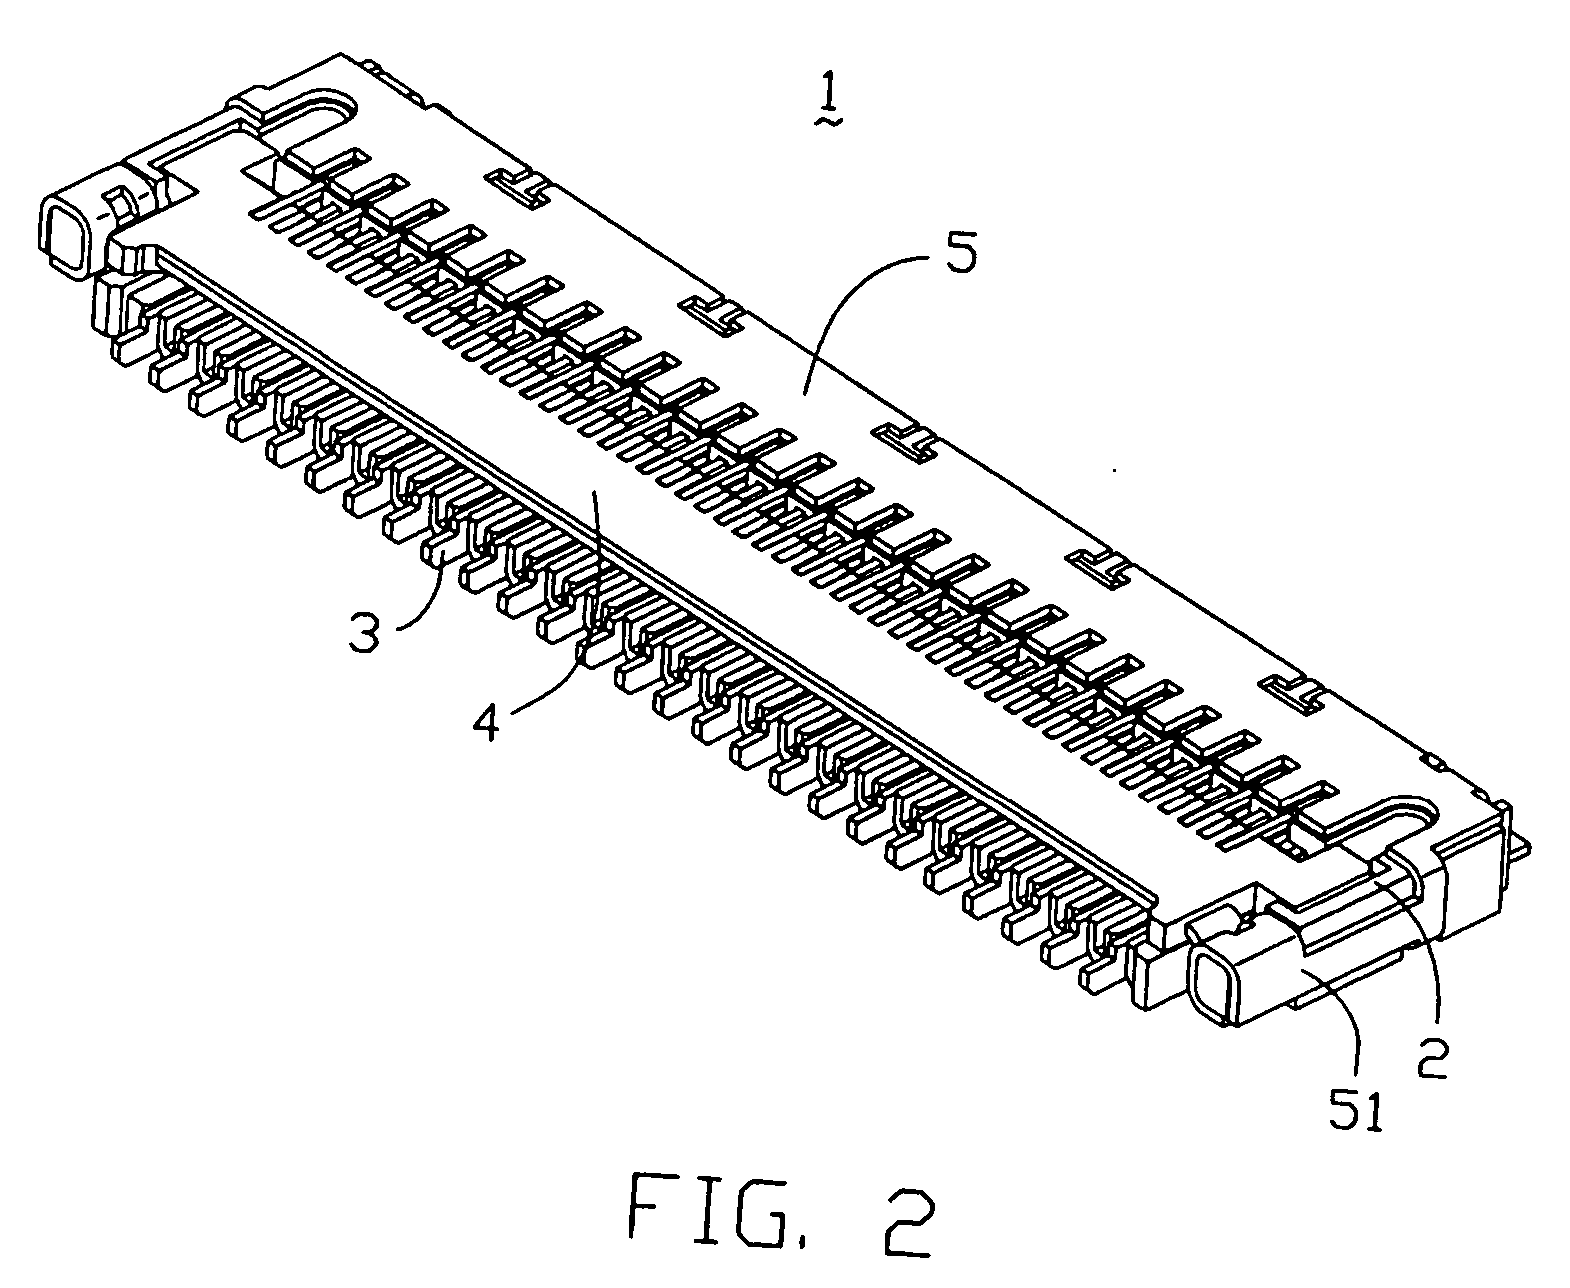 Electrical connector for flexible printed circuit board